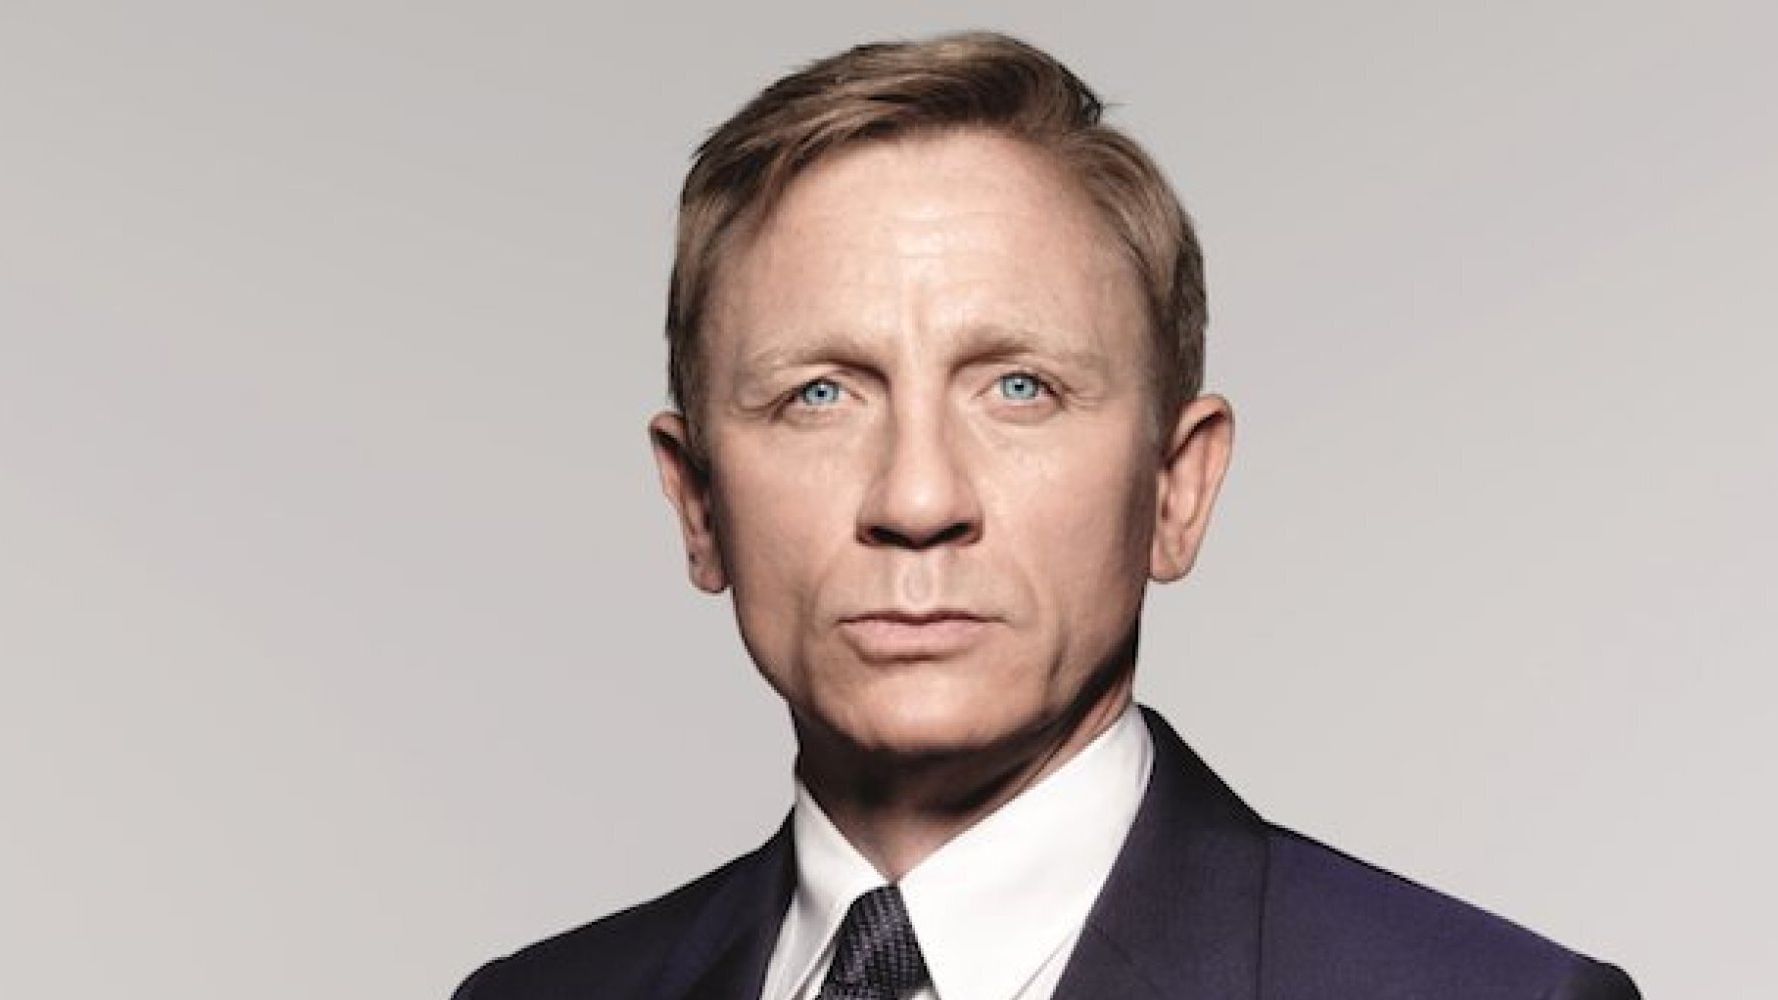 Daniel Craig As James Bond In Brand New 'Spectre' Images, To Celebrate ...